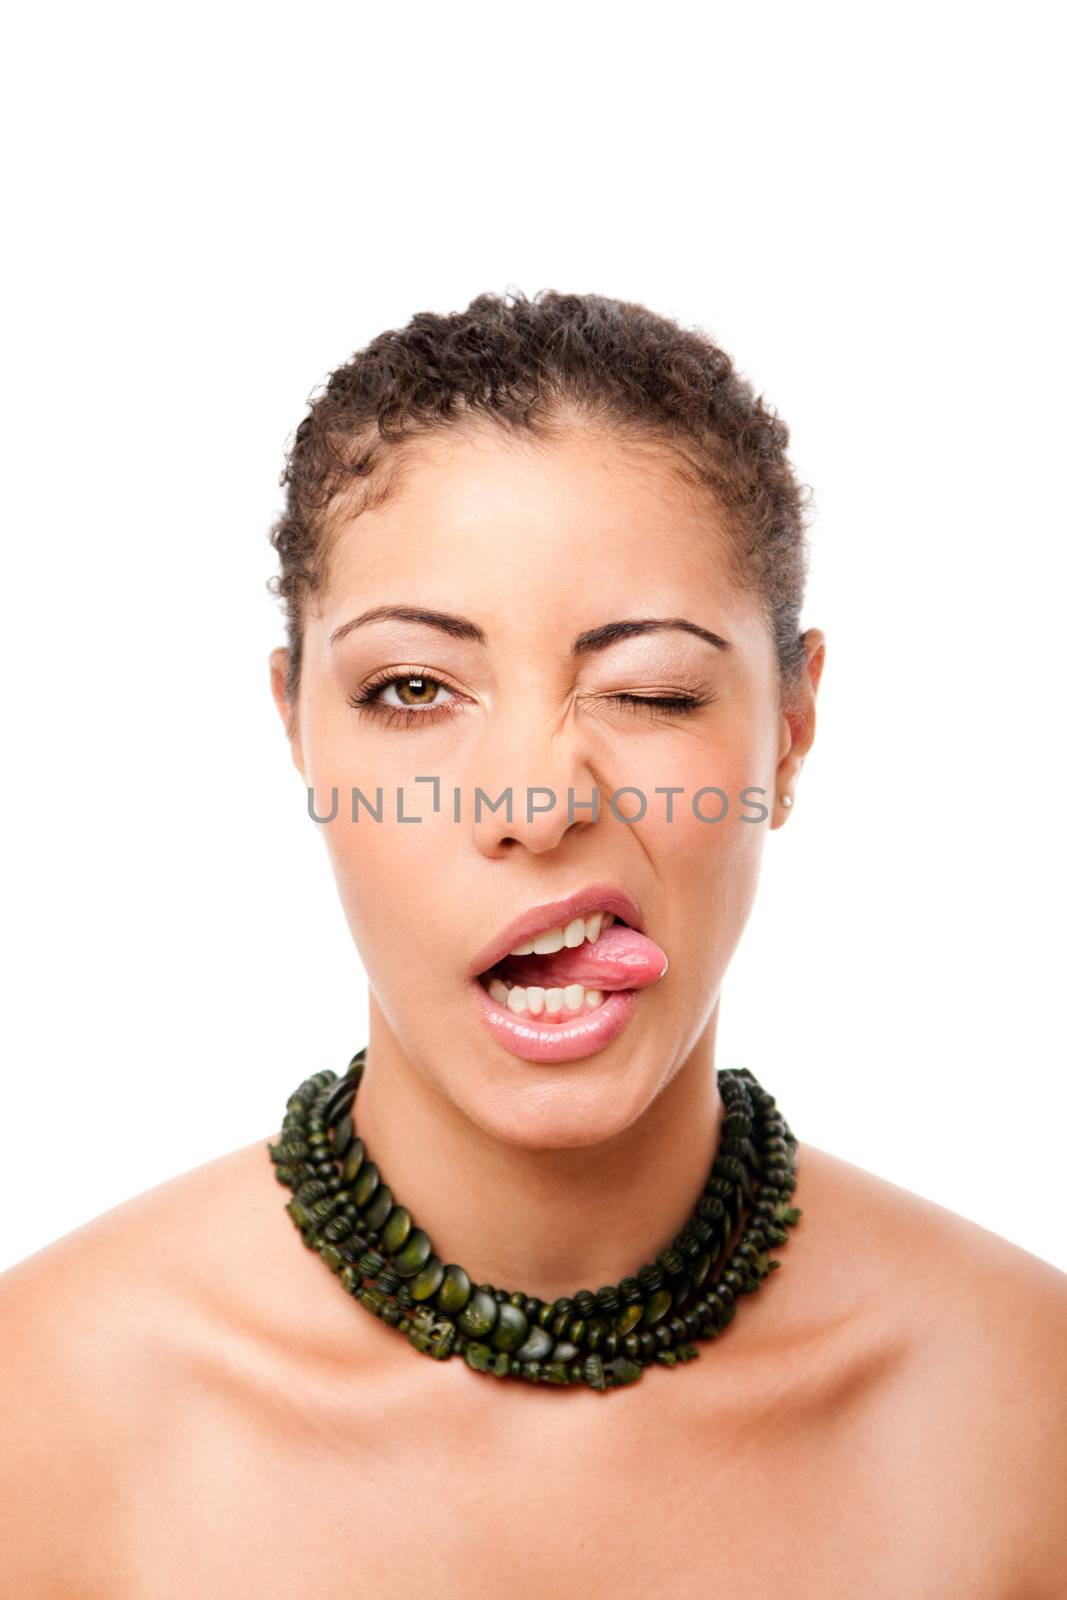 Funny face of a beautiful attractive fashion model sticking out tongue while winking, wearing green necklace, isolated.